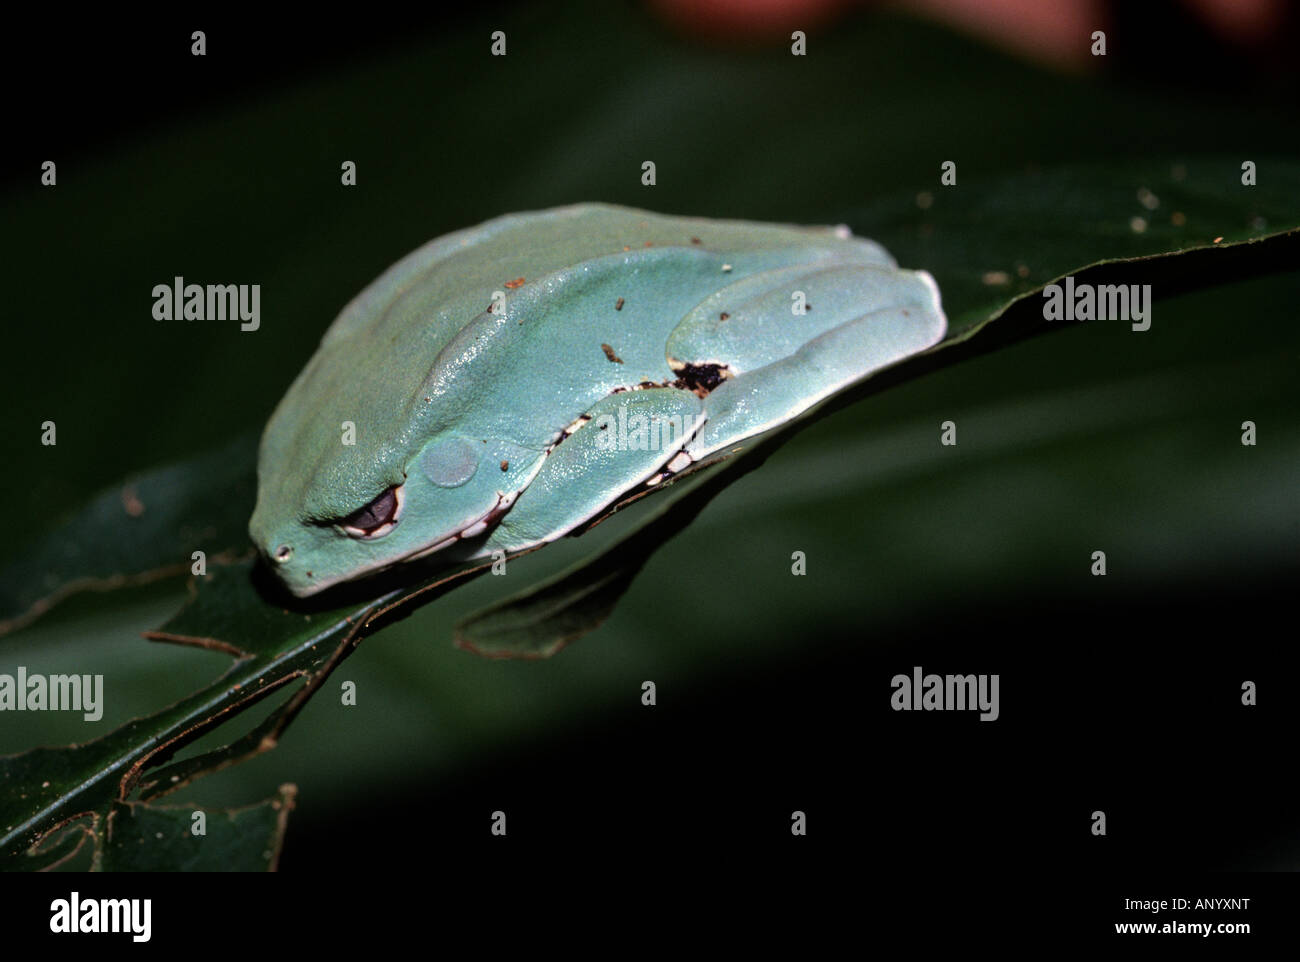 How long is the giant leaf frog?